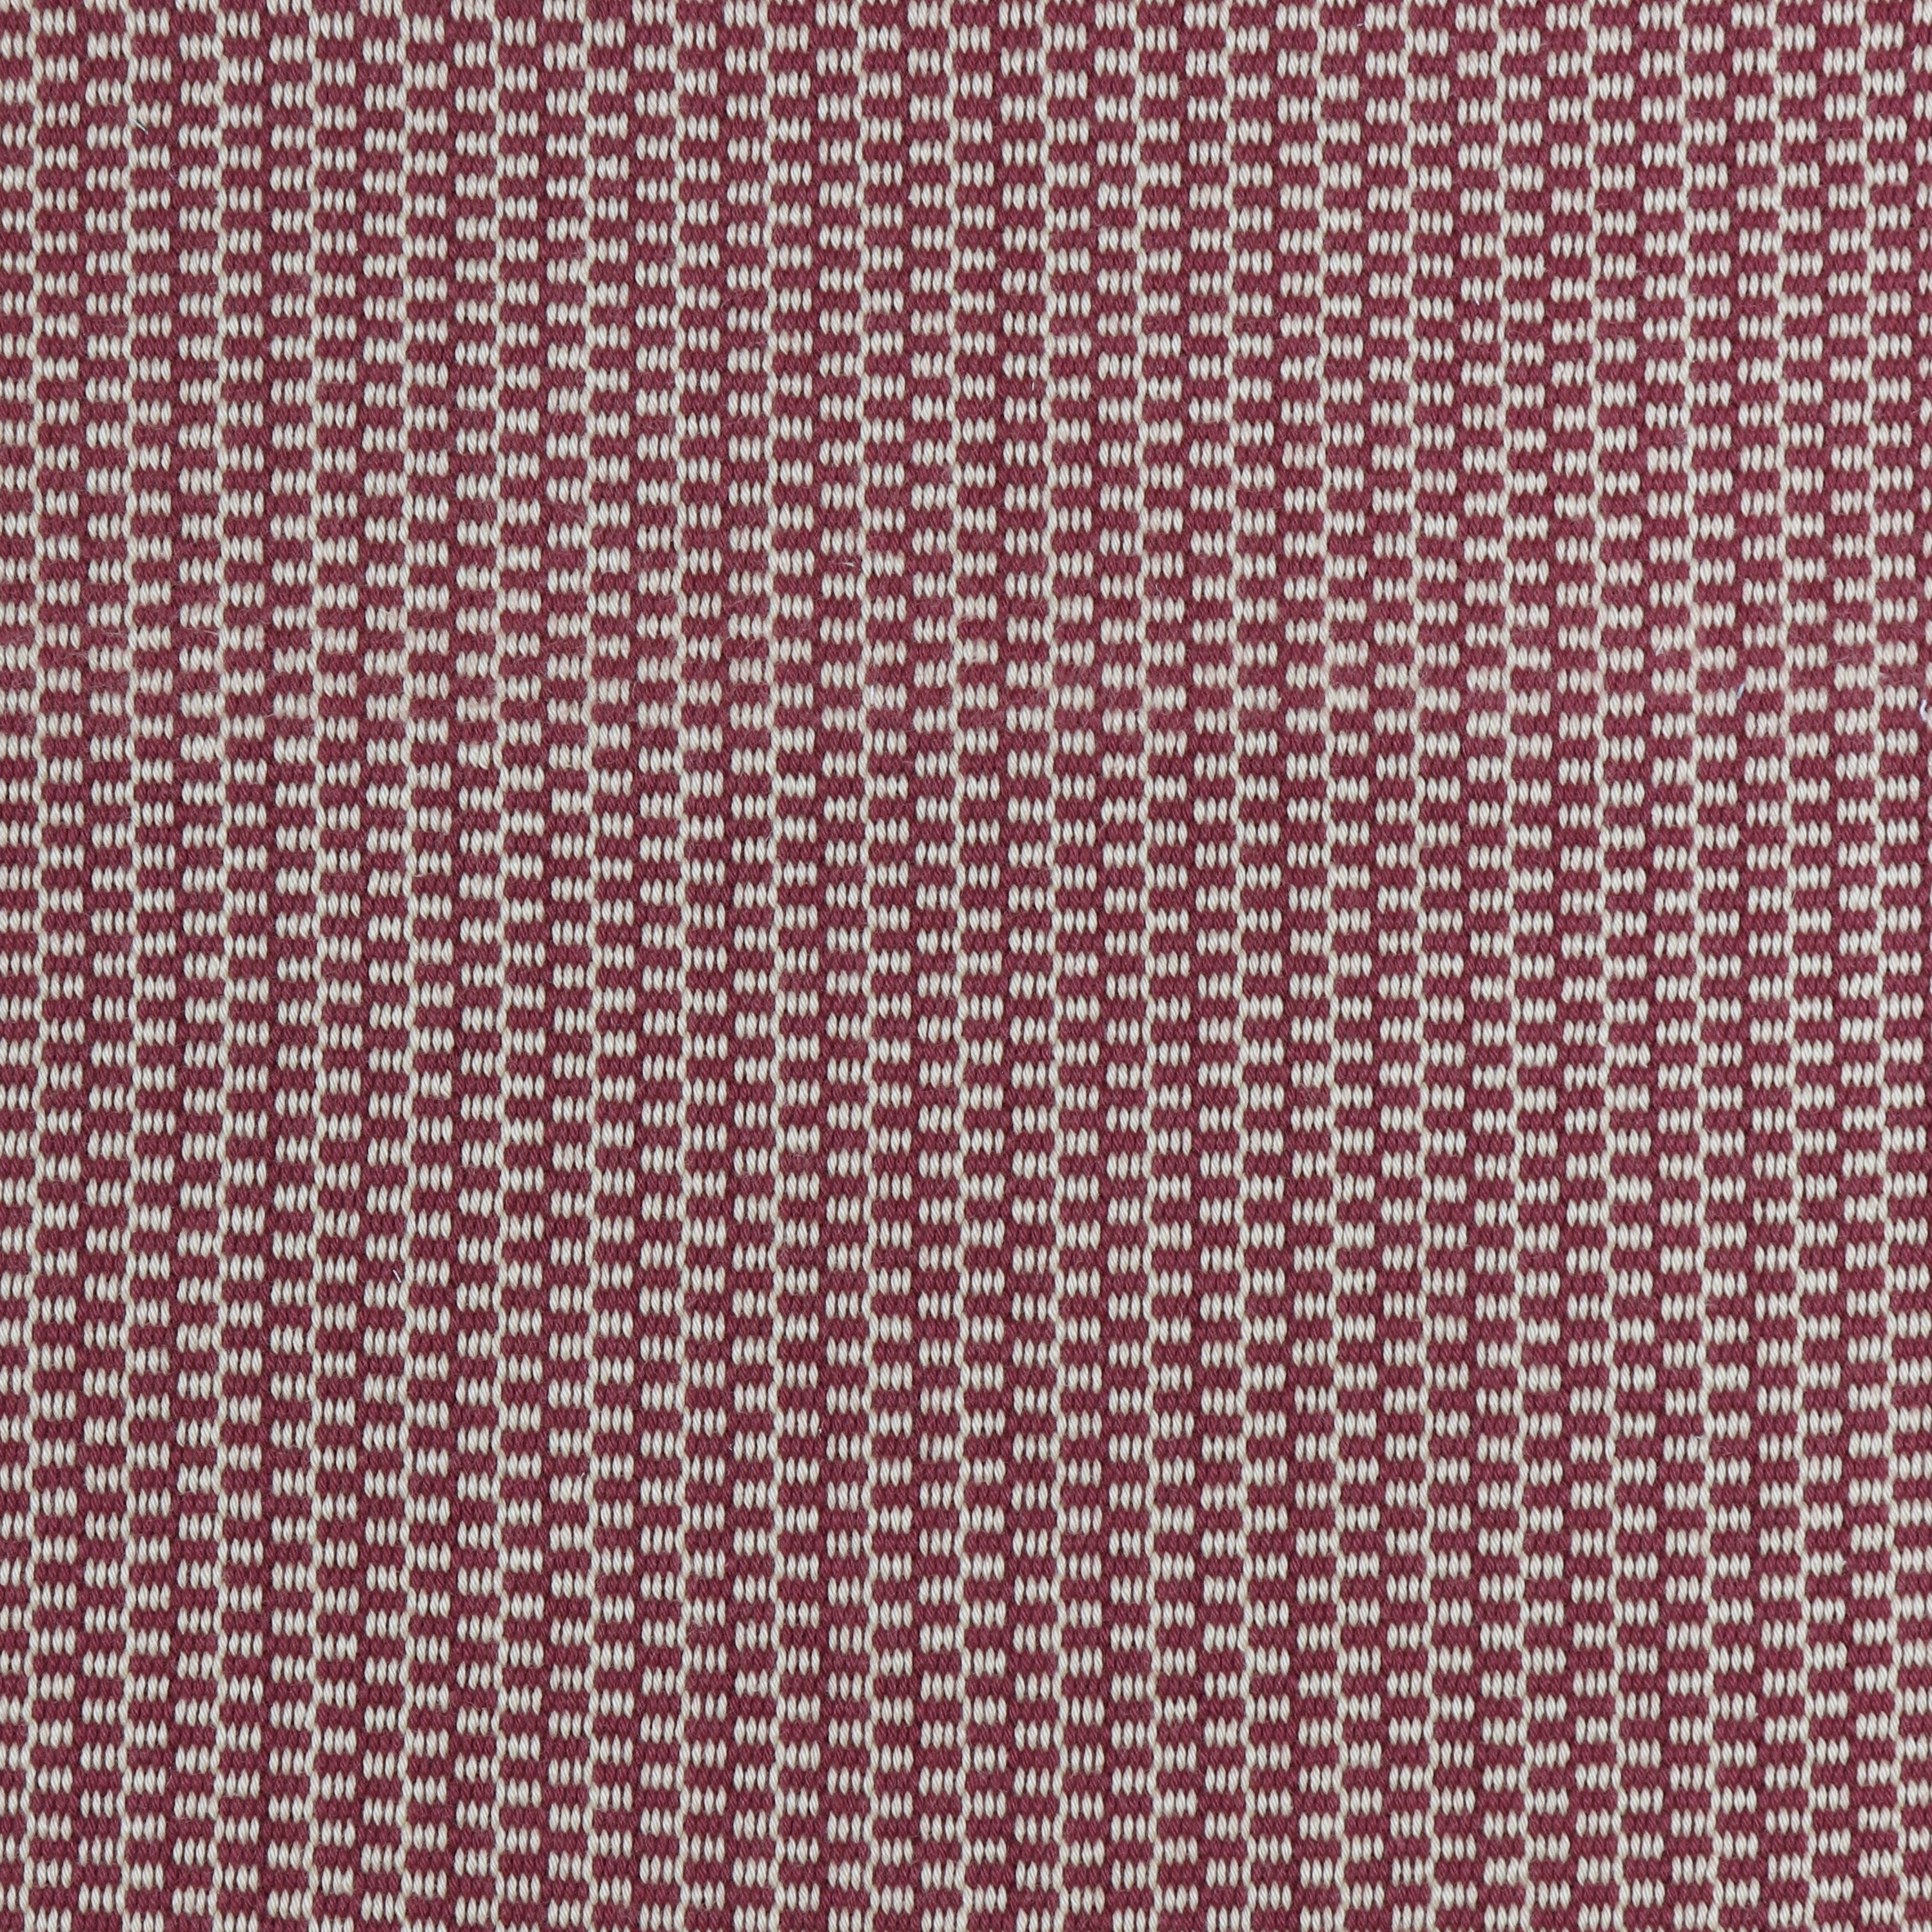 Detail of a hand-woven cotton fabric in a grid pattern in light gray and maroon.